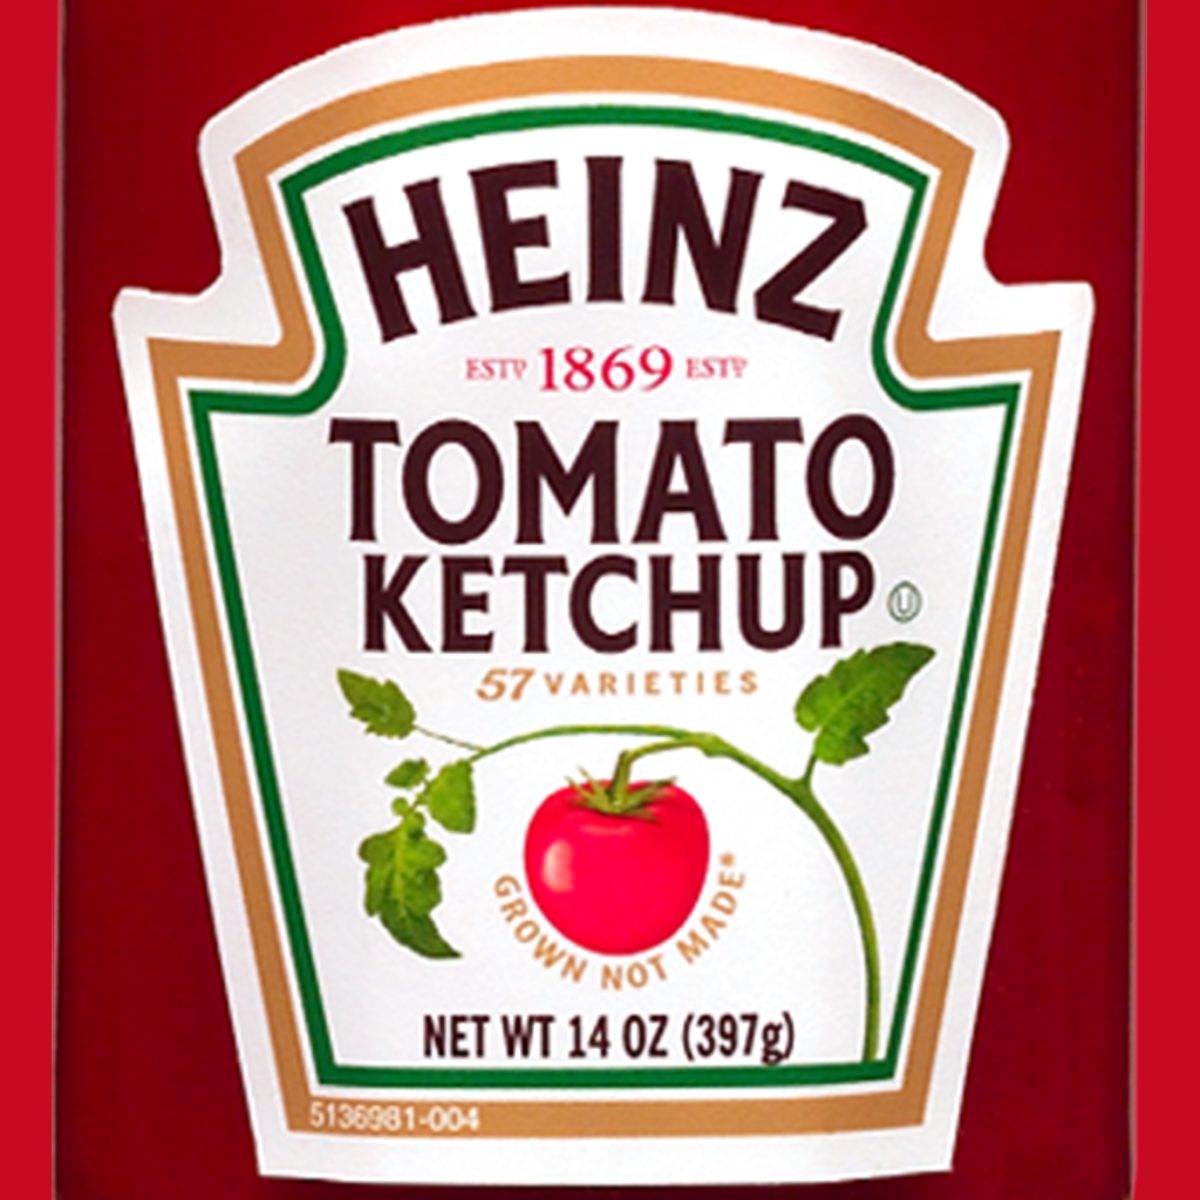 <p><strong><a class="SWhtmlLink" href="https://www.heinz.com" rel="noopener">Heinz Ketchup</a>, Pittsburgh </strong></p> <p>Today, ketchup is one of the most ubiquitous condiments in the United States, but it wasn't actually invented until the late 1800s. A man named Henry J. Heinz added a large amount of vinegar to preserve ripe, red tomatoes and now it's one of the most recognizable bottles in the world.</p> <p>You can clean with ketchup—<a class="SWhtmlLink" href="https://www.tasteofhome.com/collection/clean-with-ketchup/" rel="noopener">here's how</a>.</p>